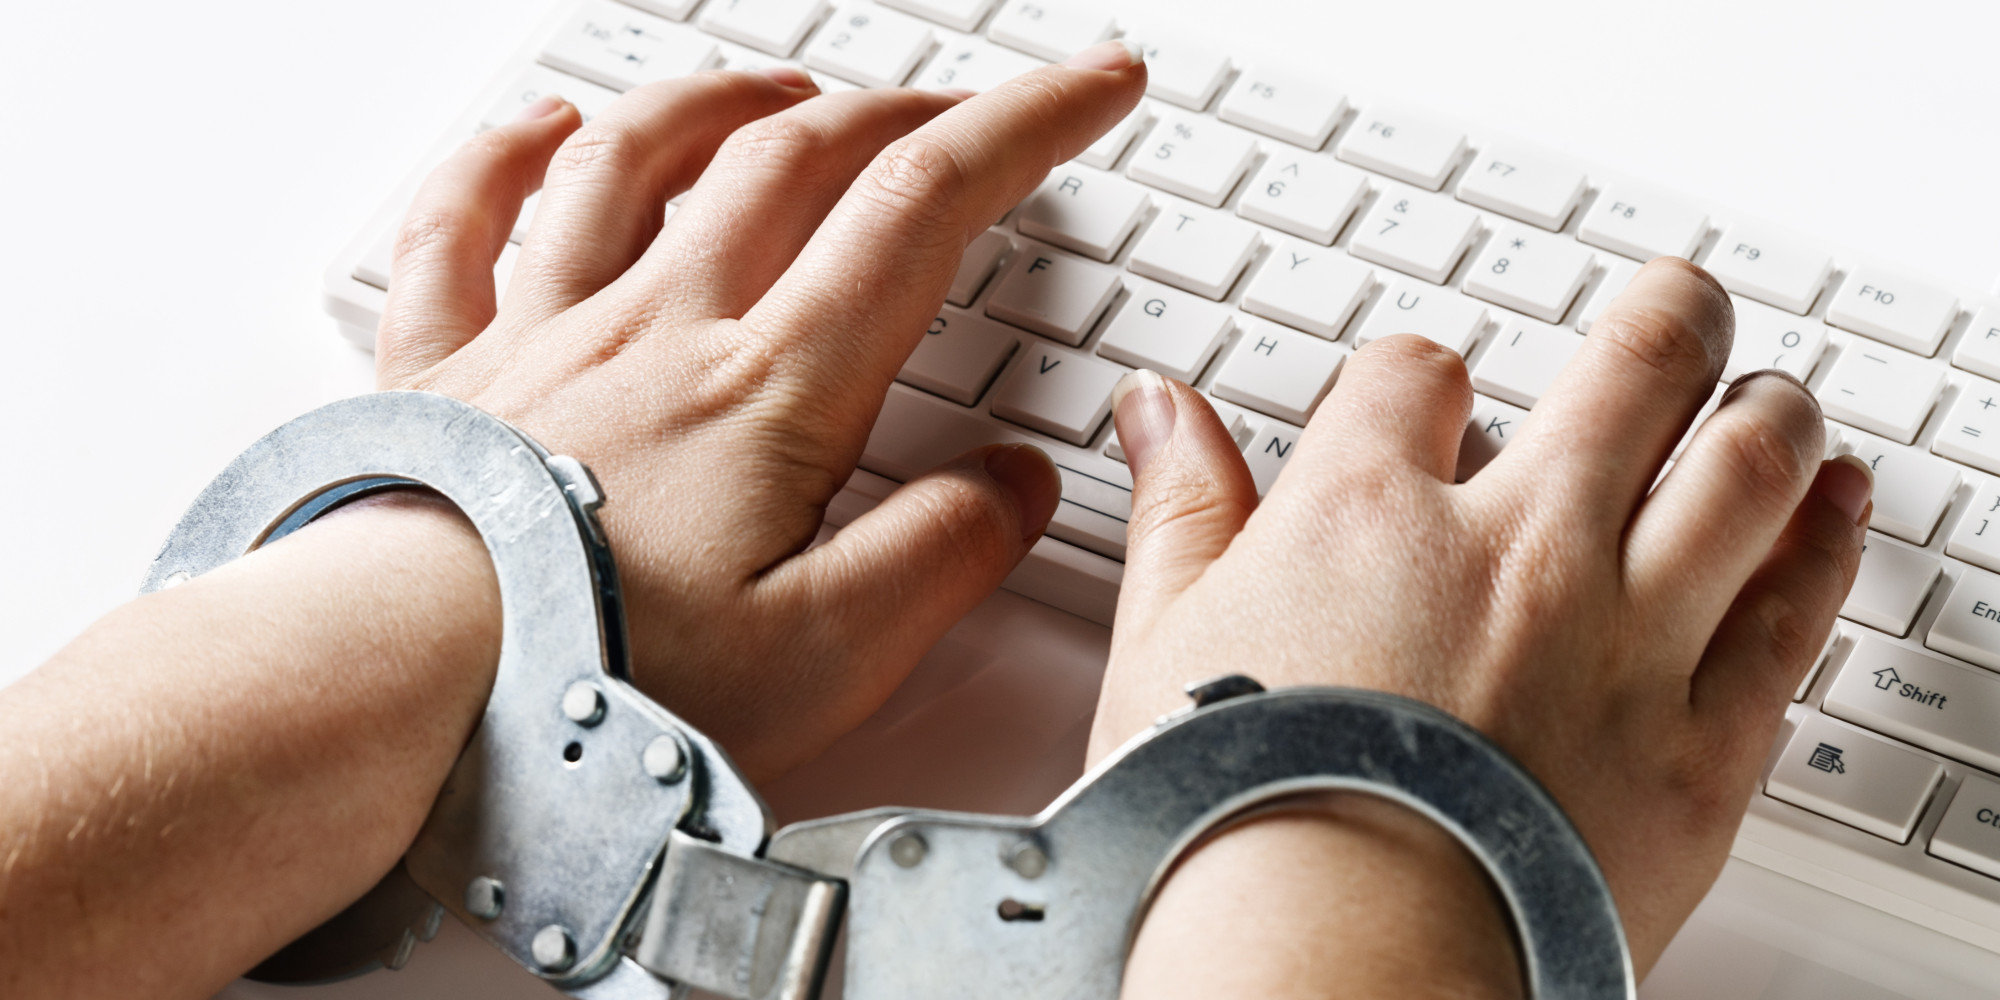 keyboard with handcuffs censorship graphic